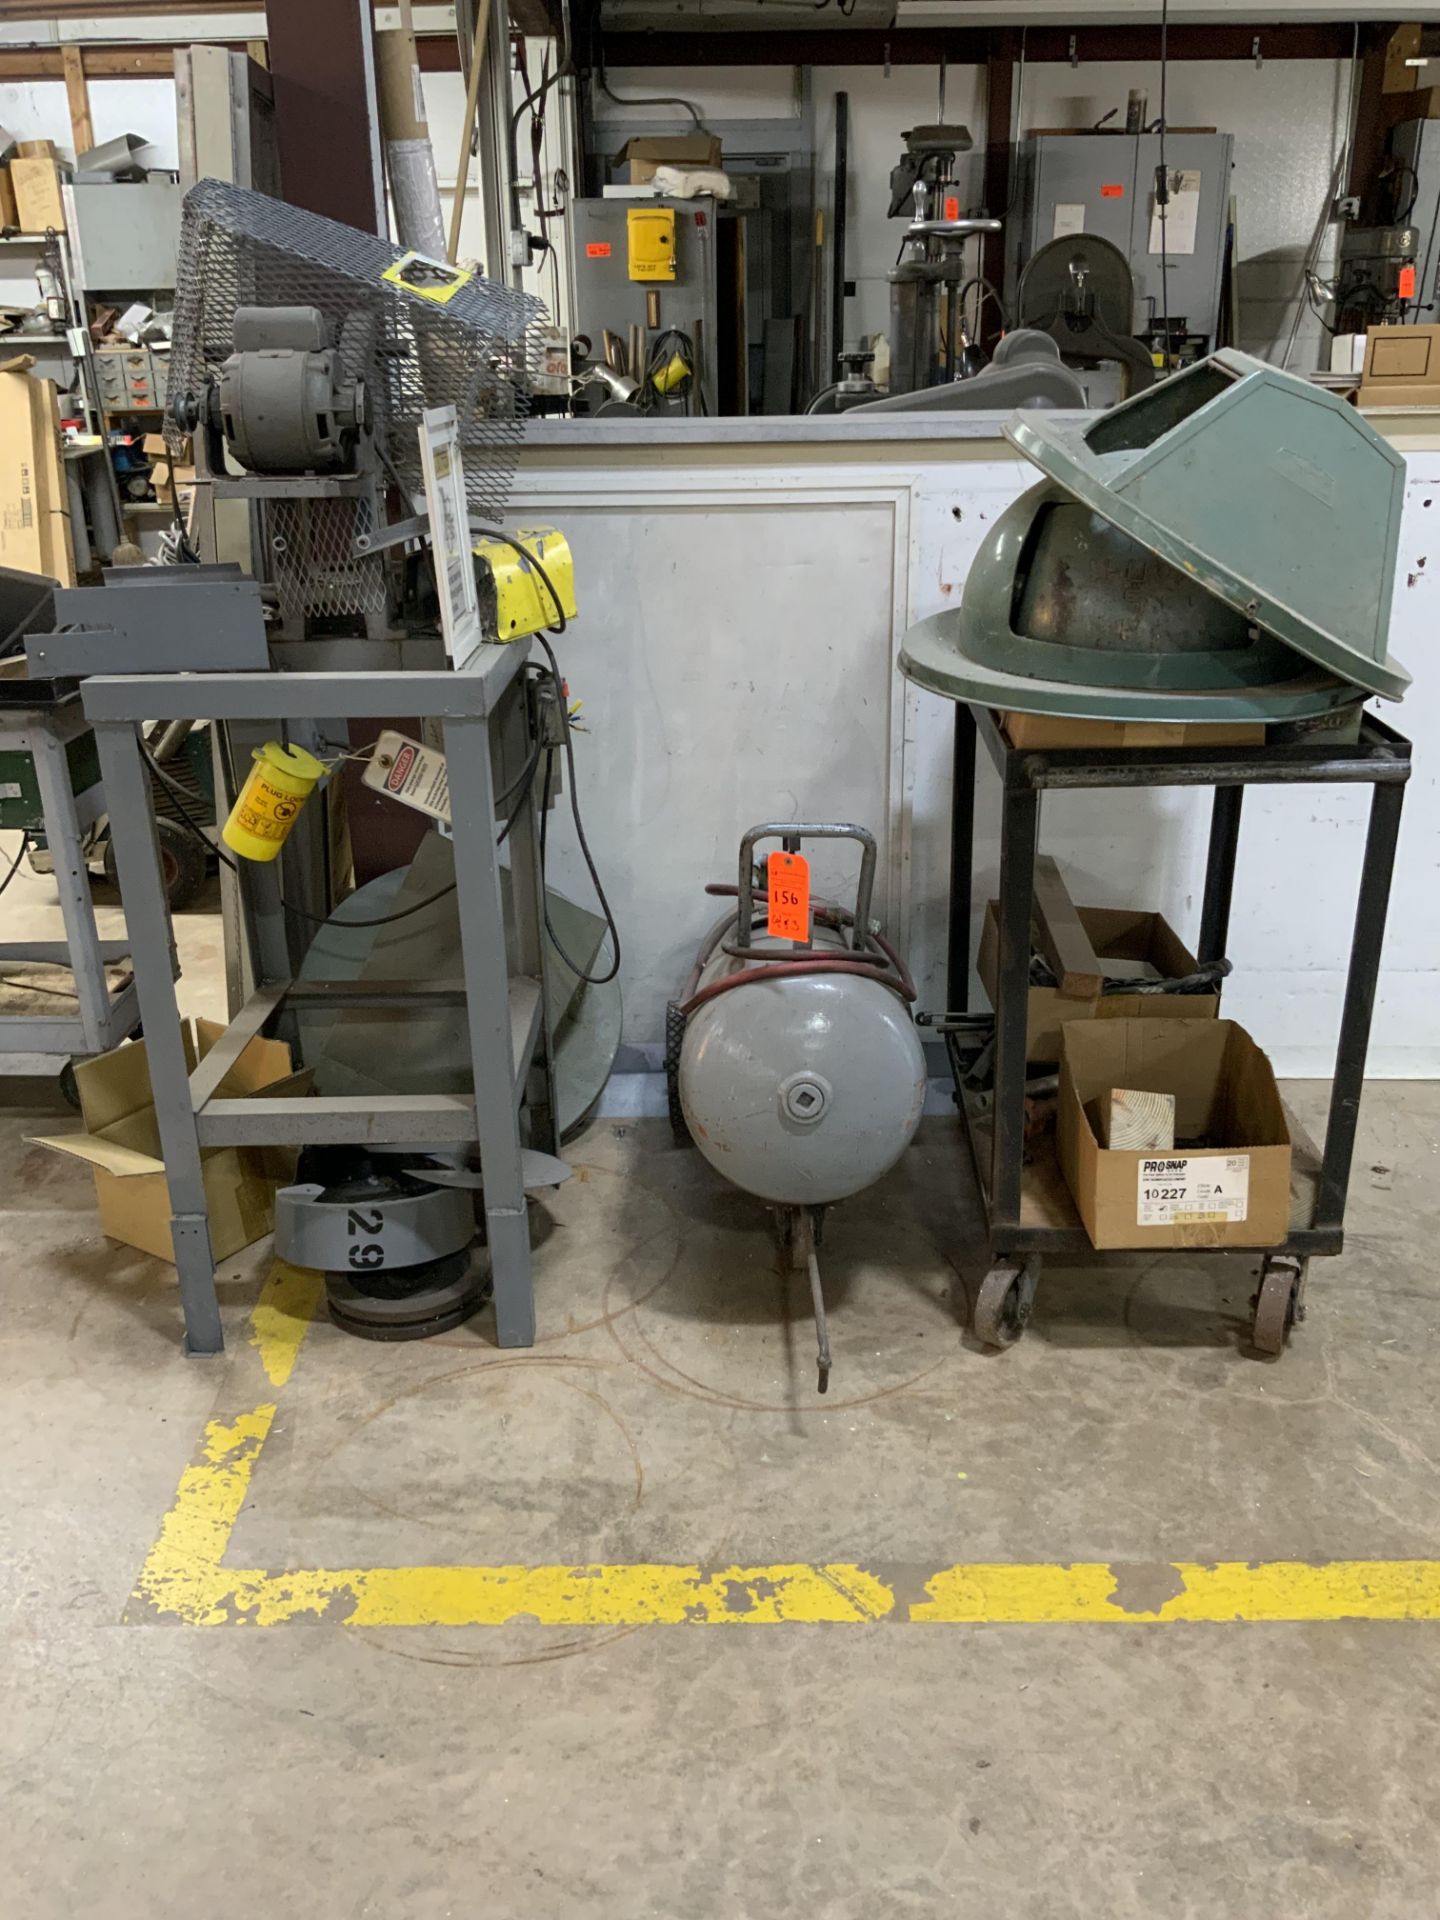 Lot of Incomplete Punch, Air Compressor & Cart w/ Hardware, etc.